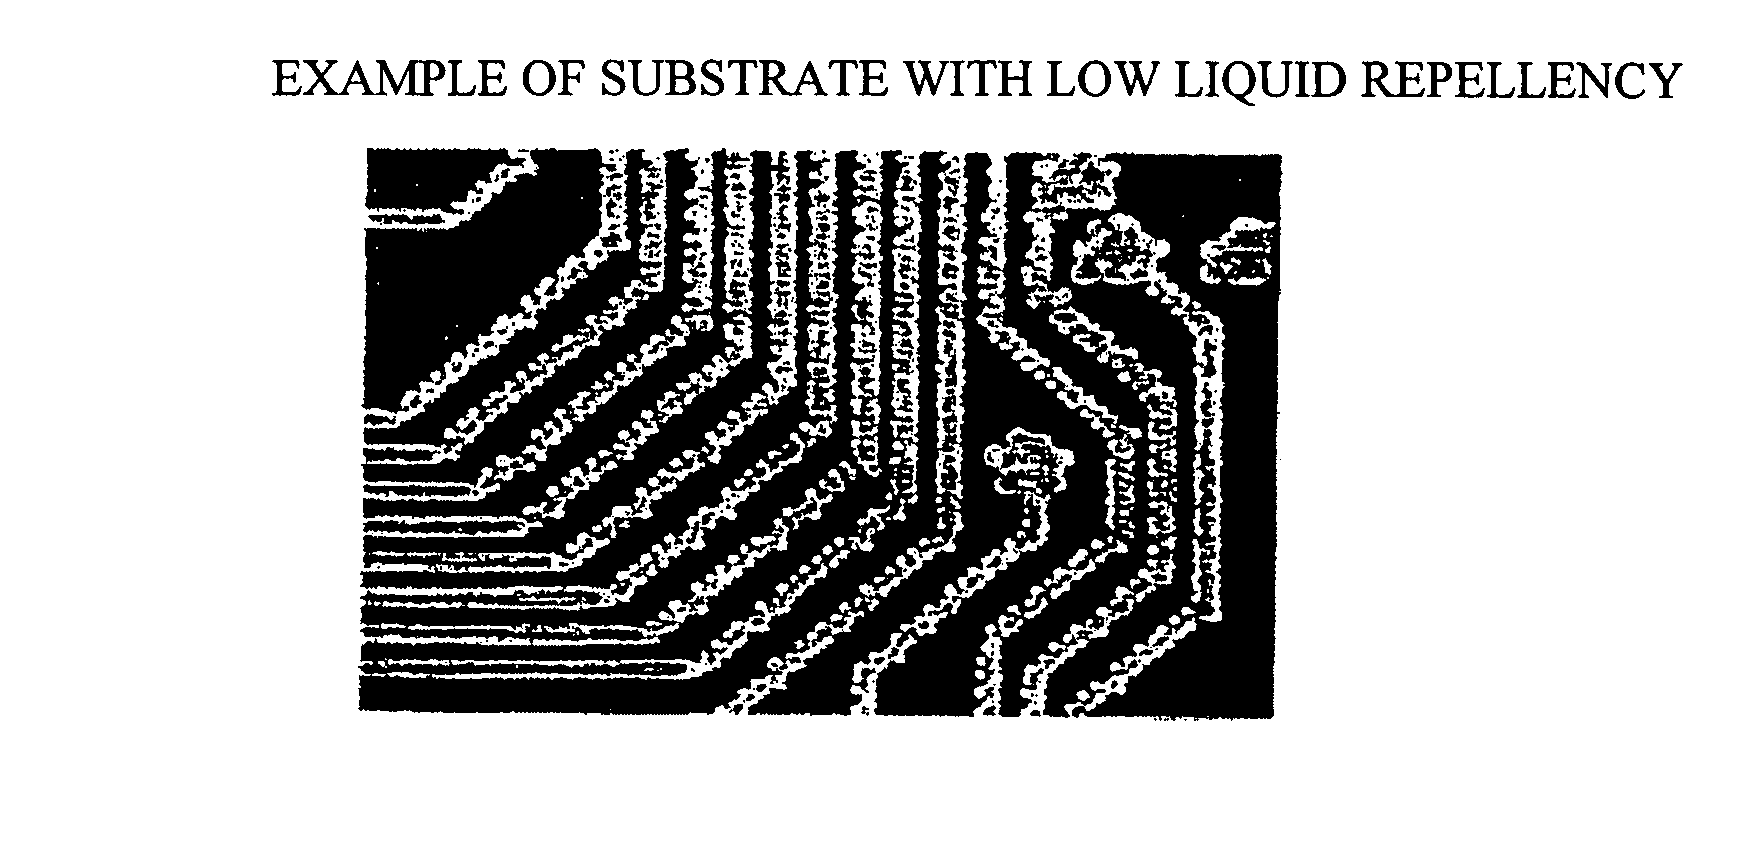 Wiring substrate